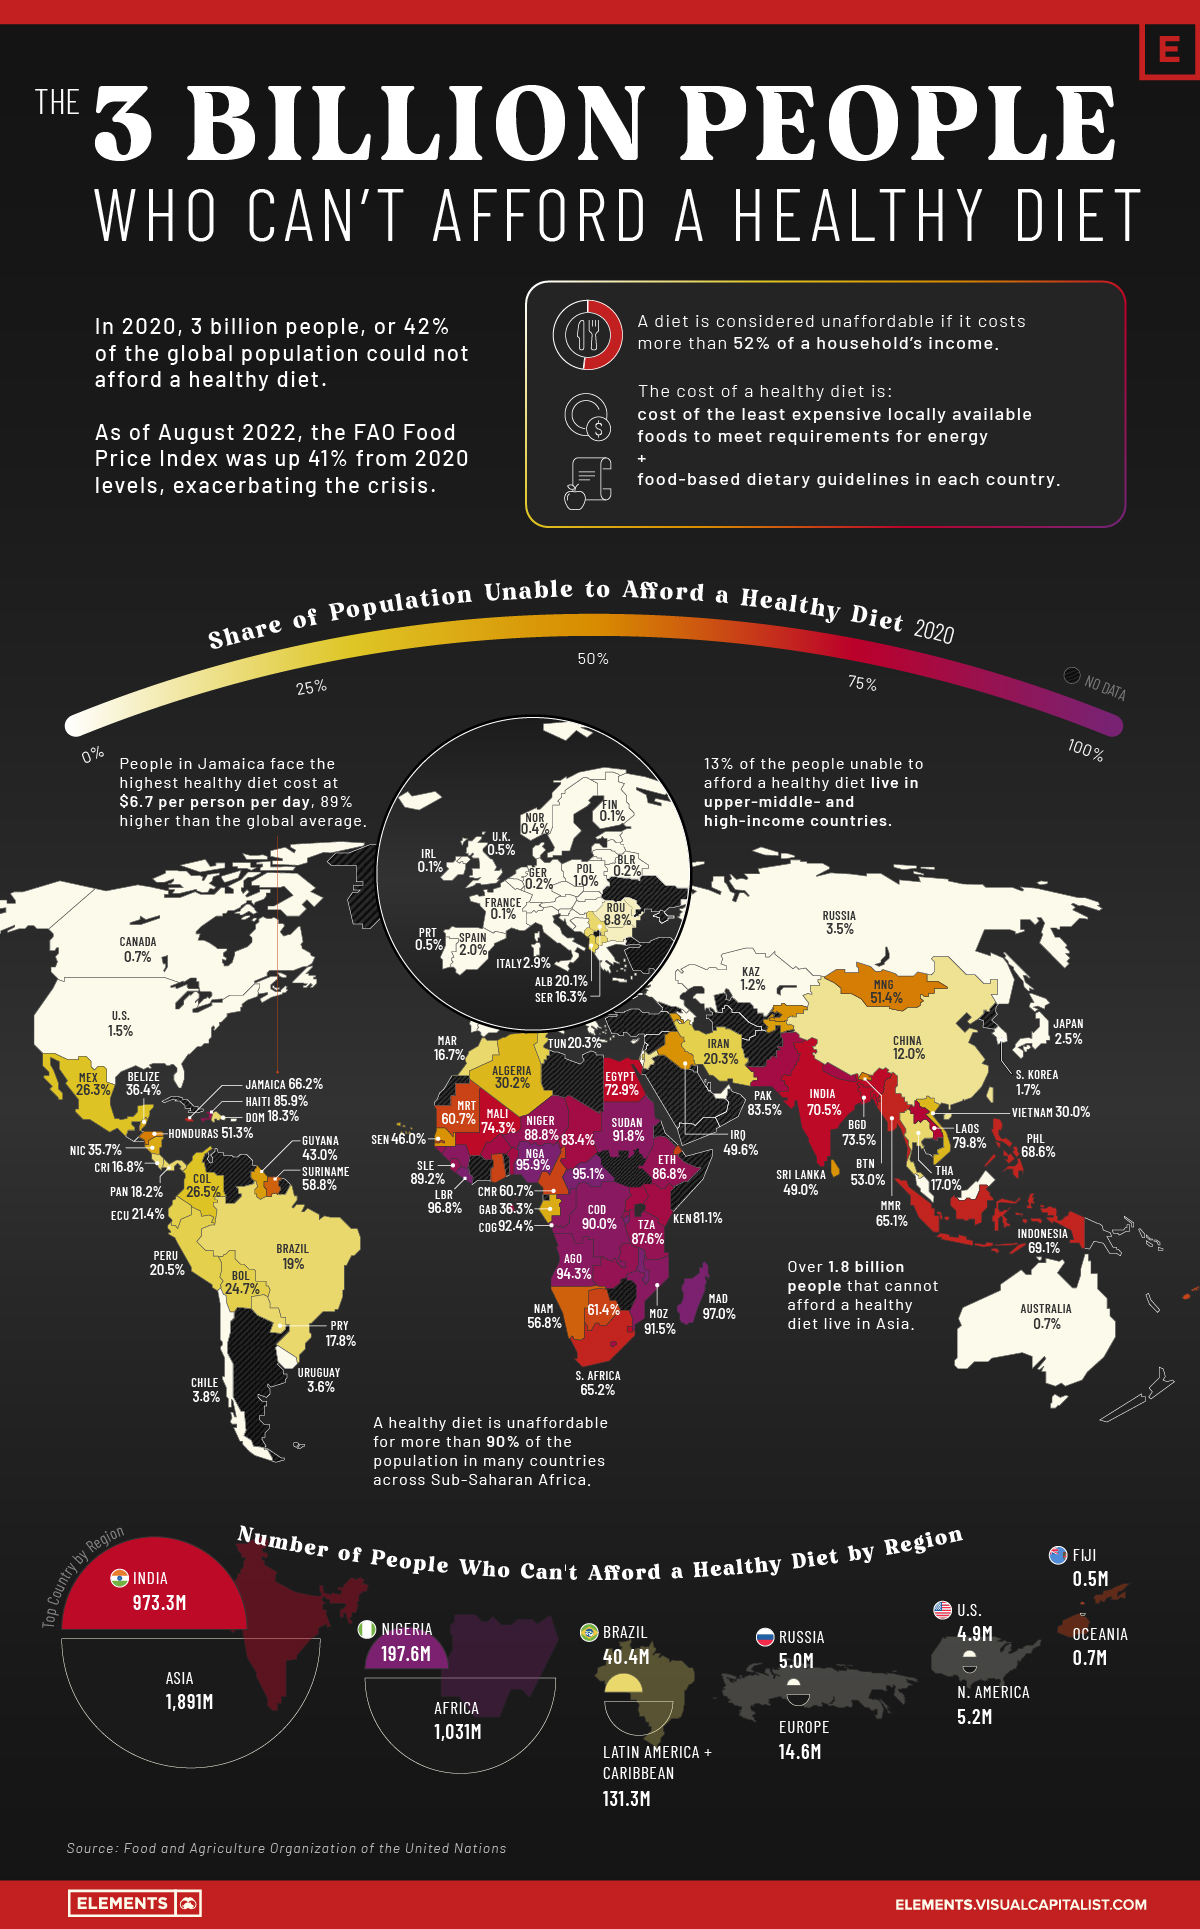 Mapped: The 3 Billion People Can't Afford a Healthy Diet 